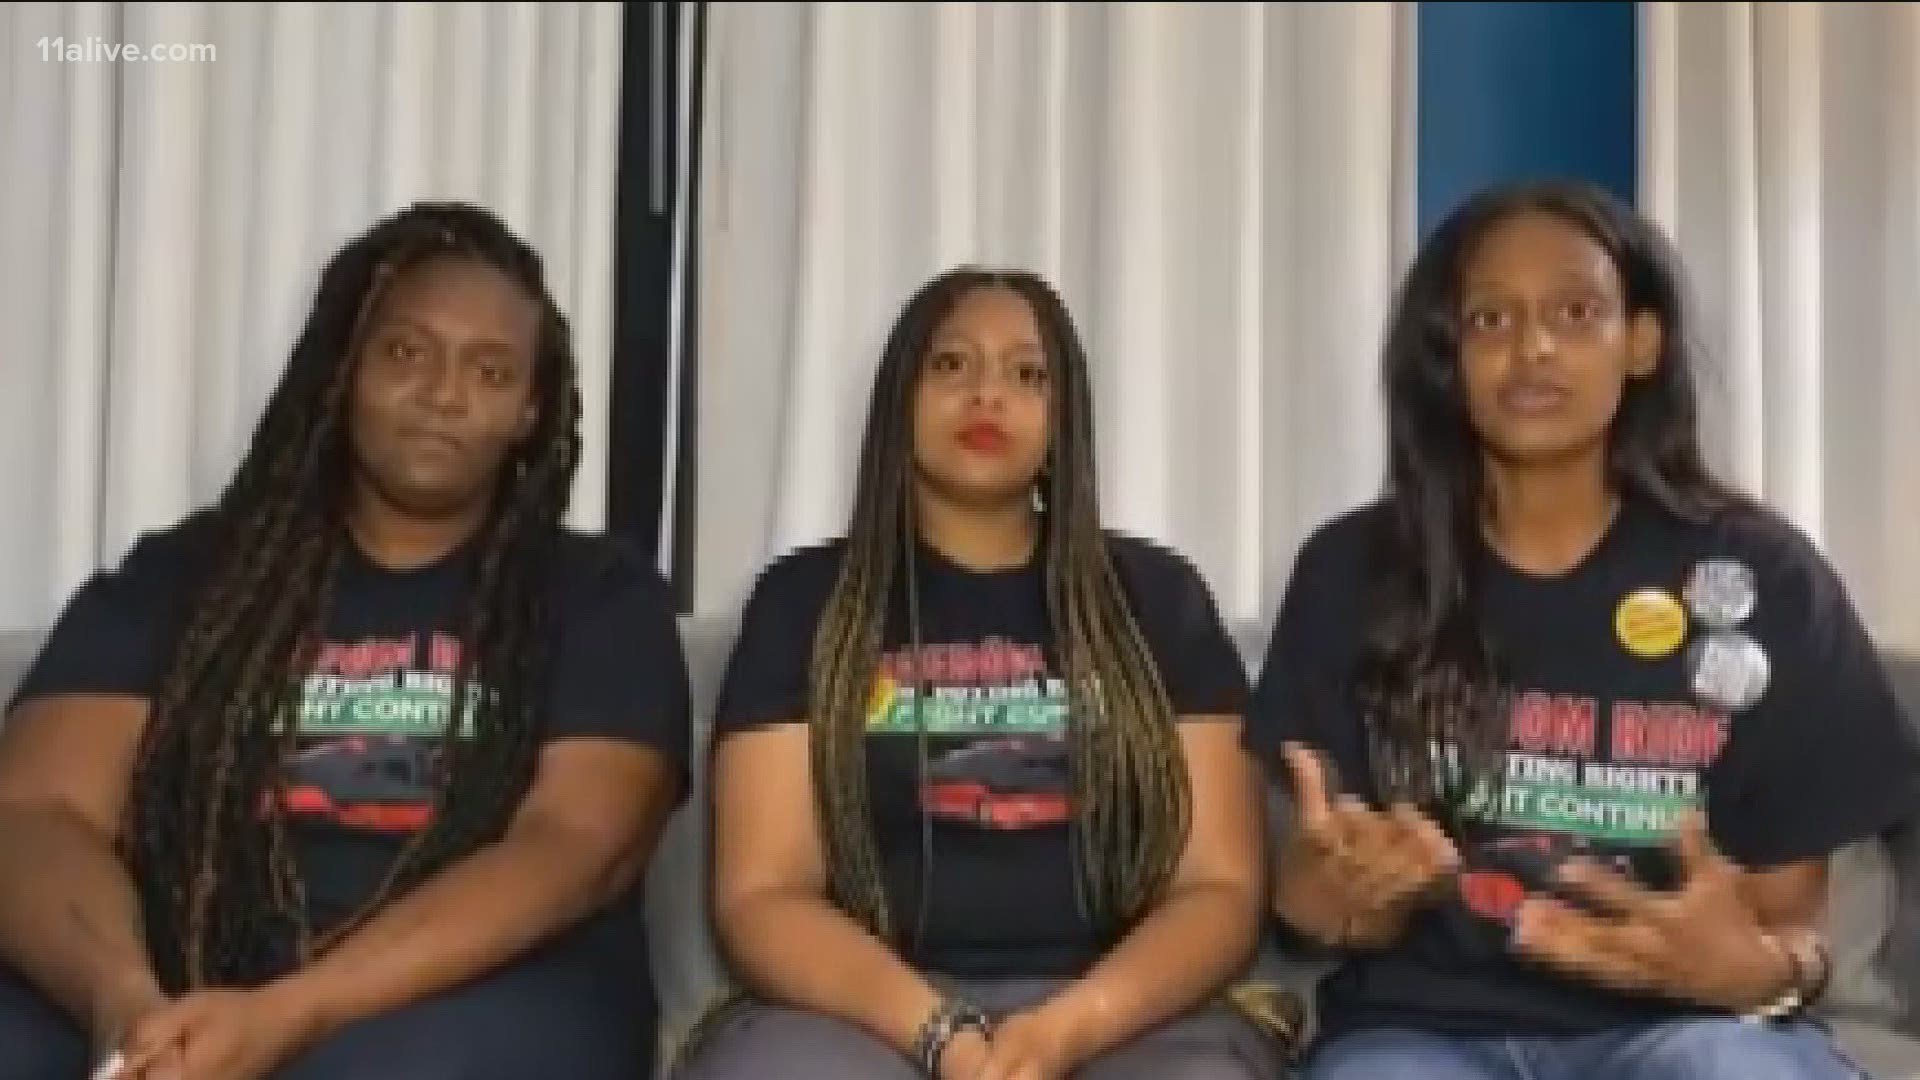 Before the video that shocked and changed the world, none of these three women considered themselves activists.